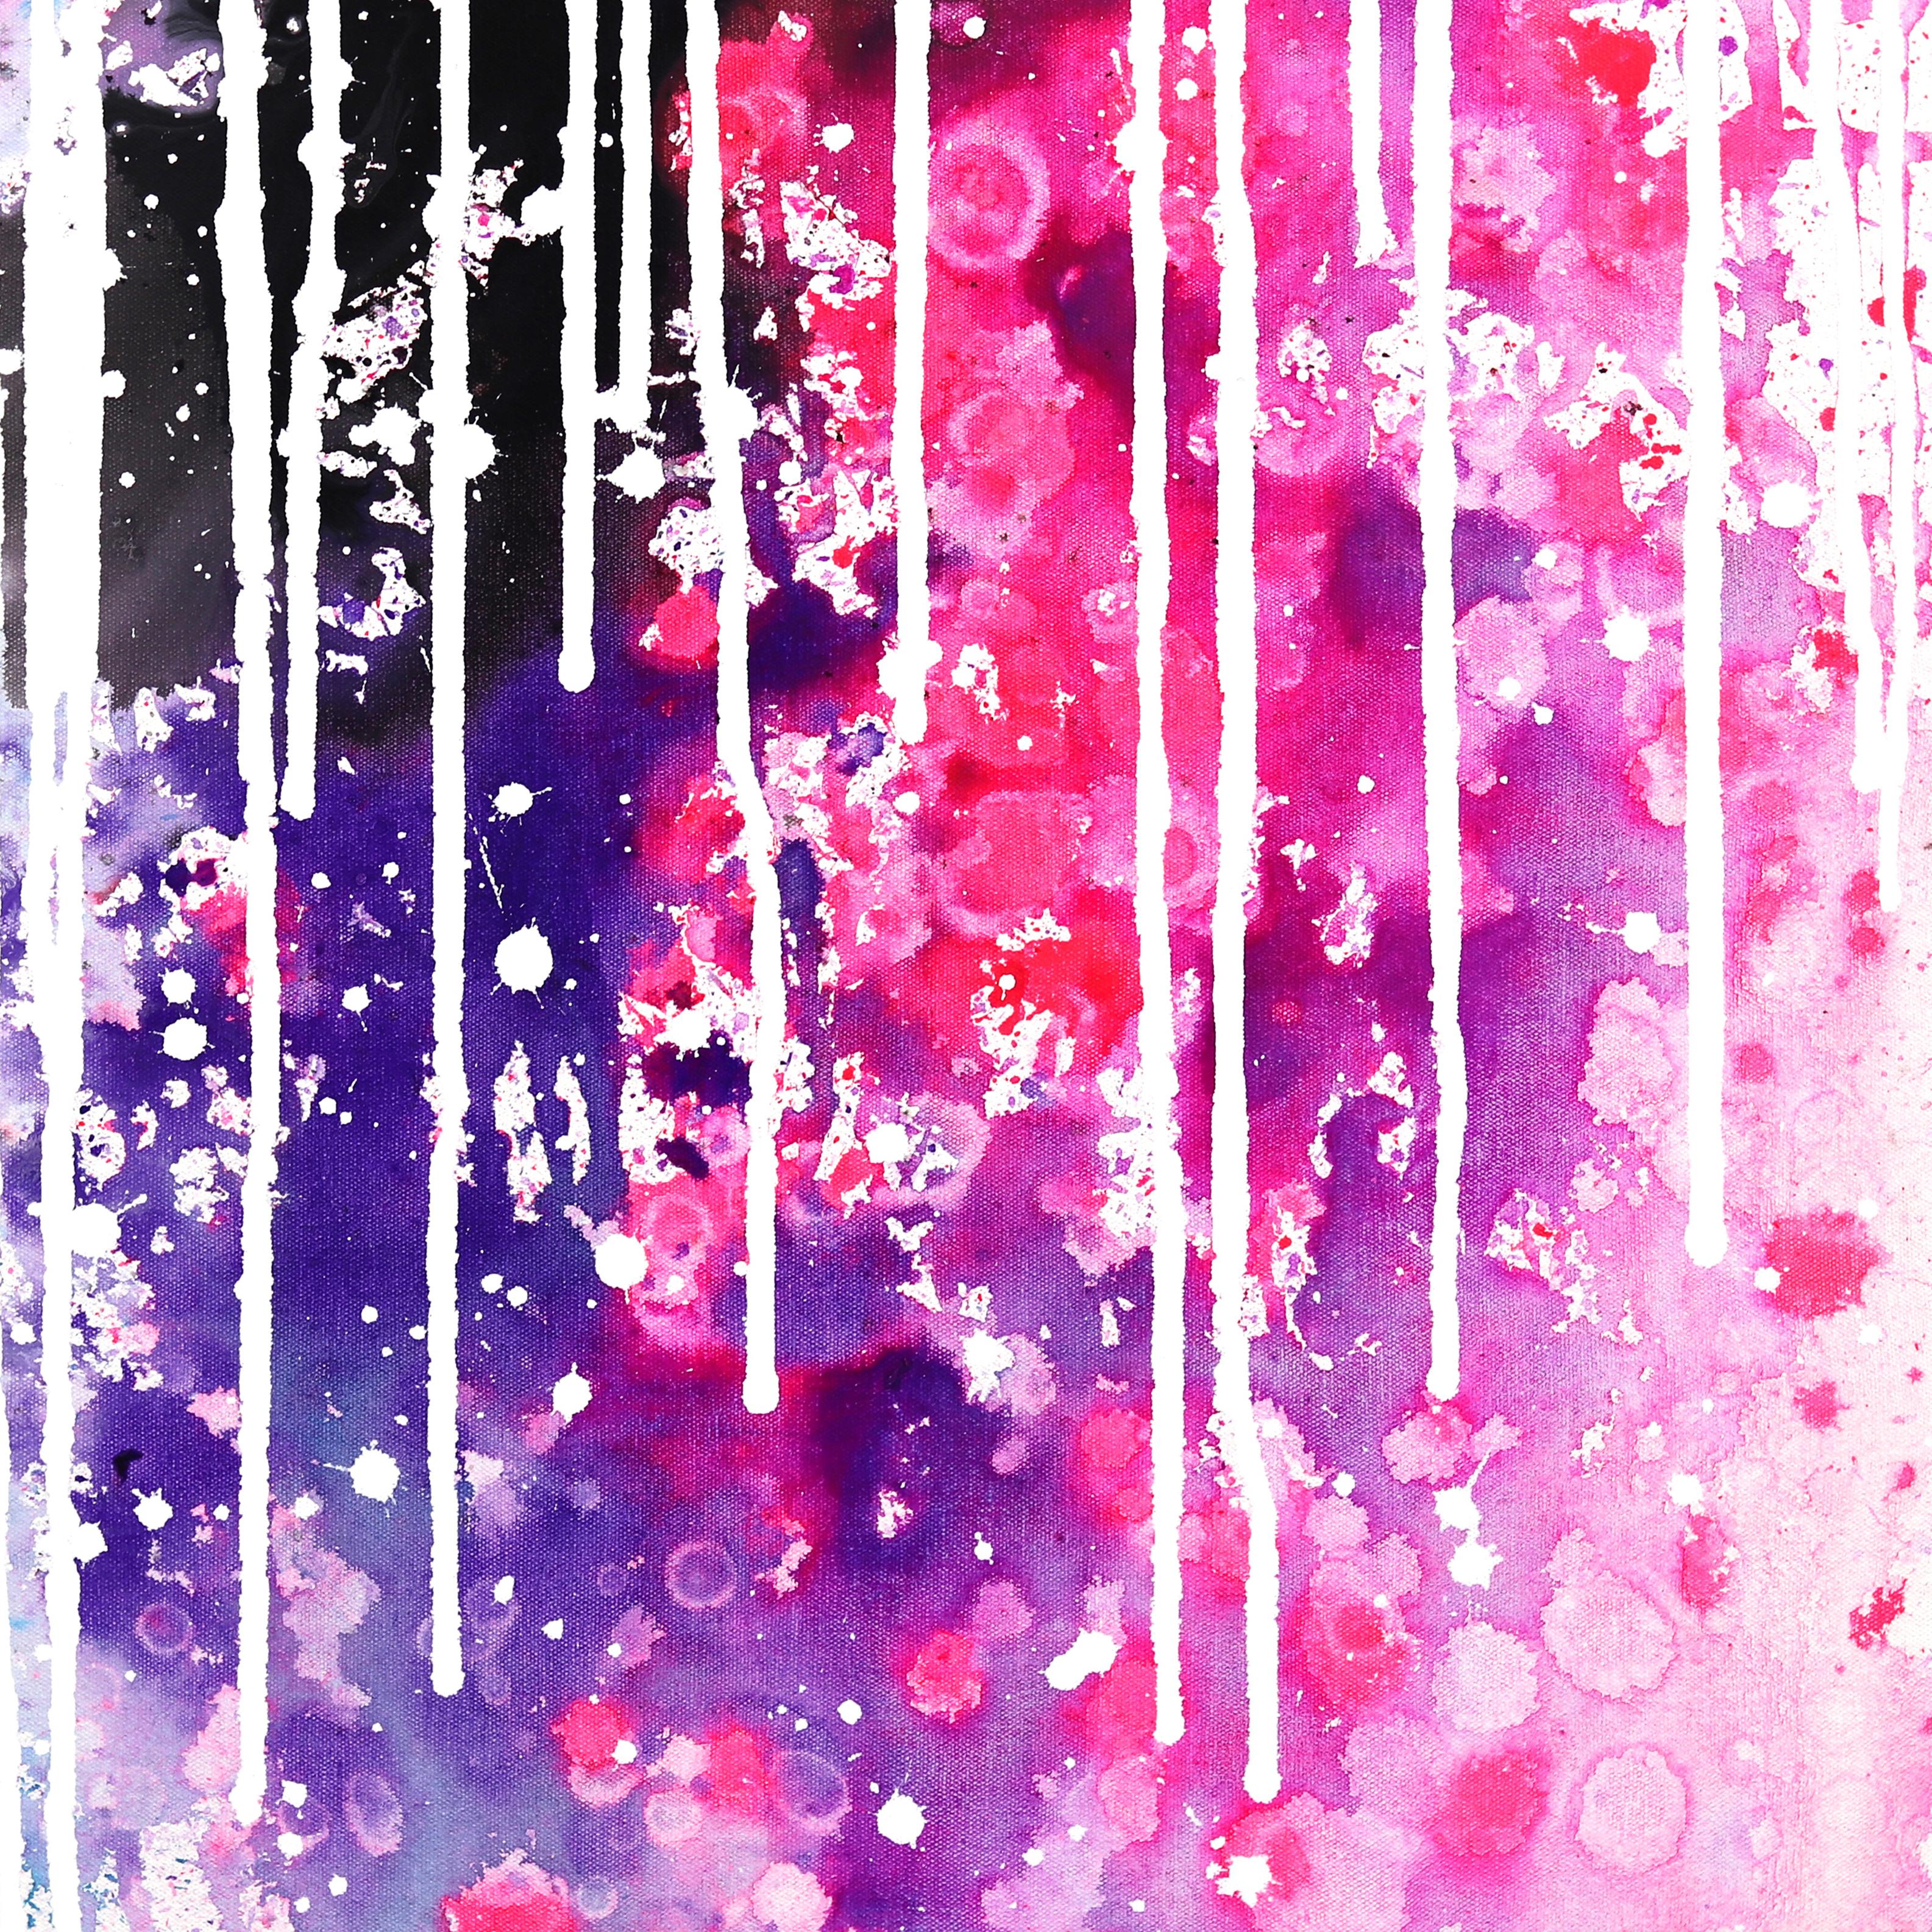 Energetic Flow - Large Oversized Blue Magenta Black White Ethereal Space Artwork For Sale 5